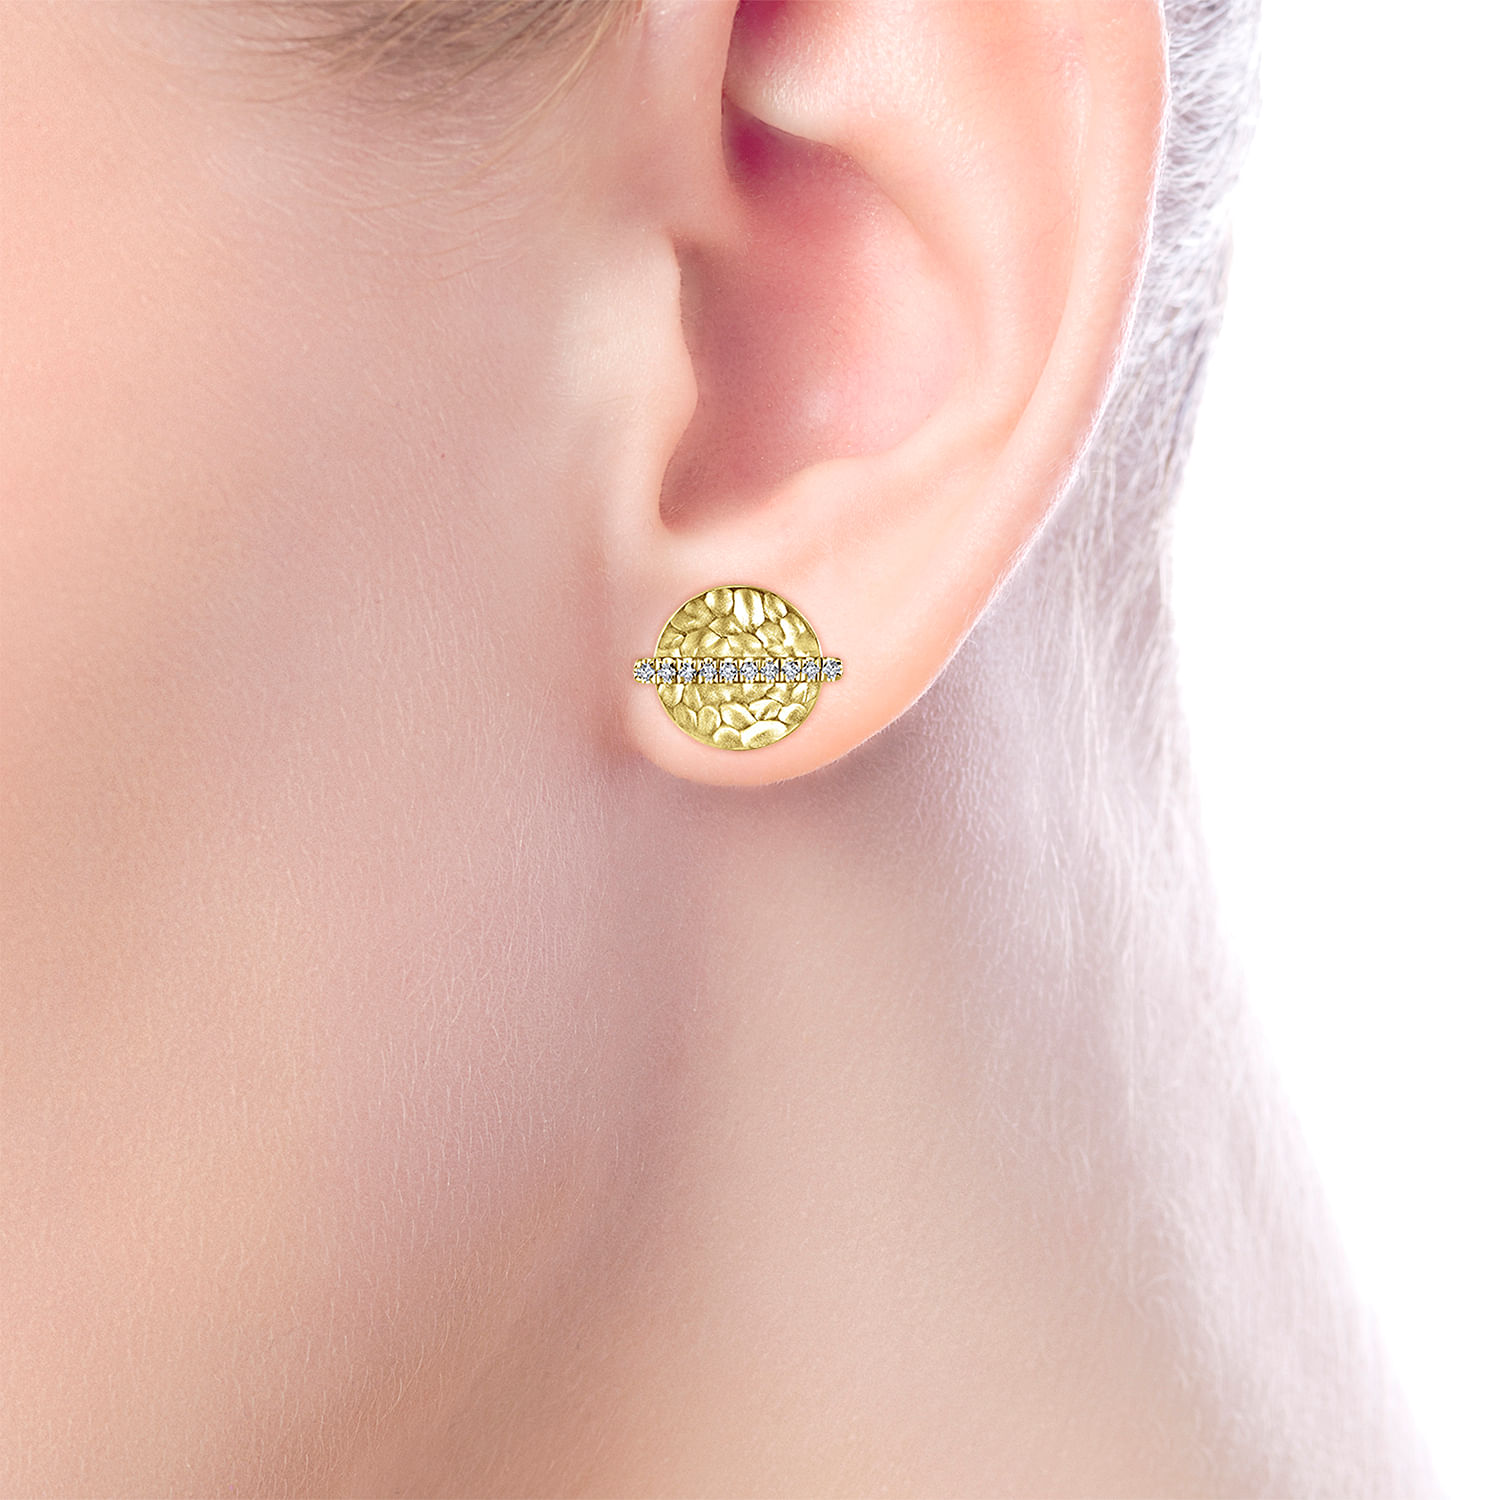 14K Yellow Gold Hammered Discs with Diamond Bar Center Stud Earrings